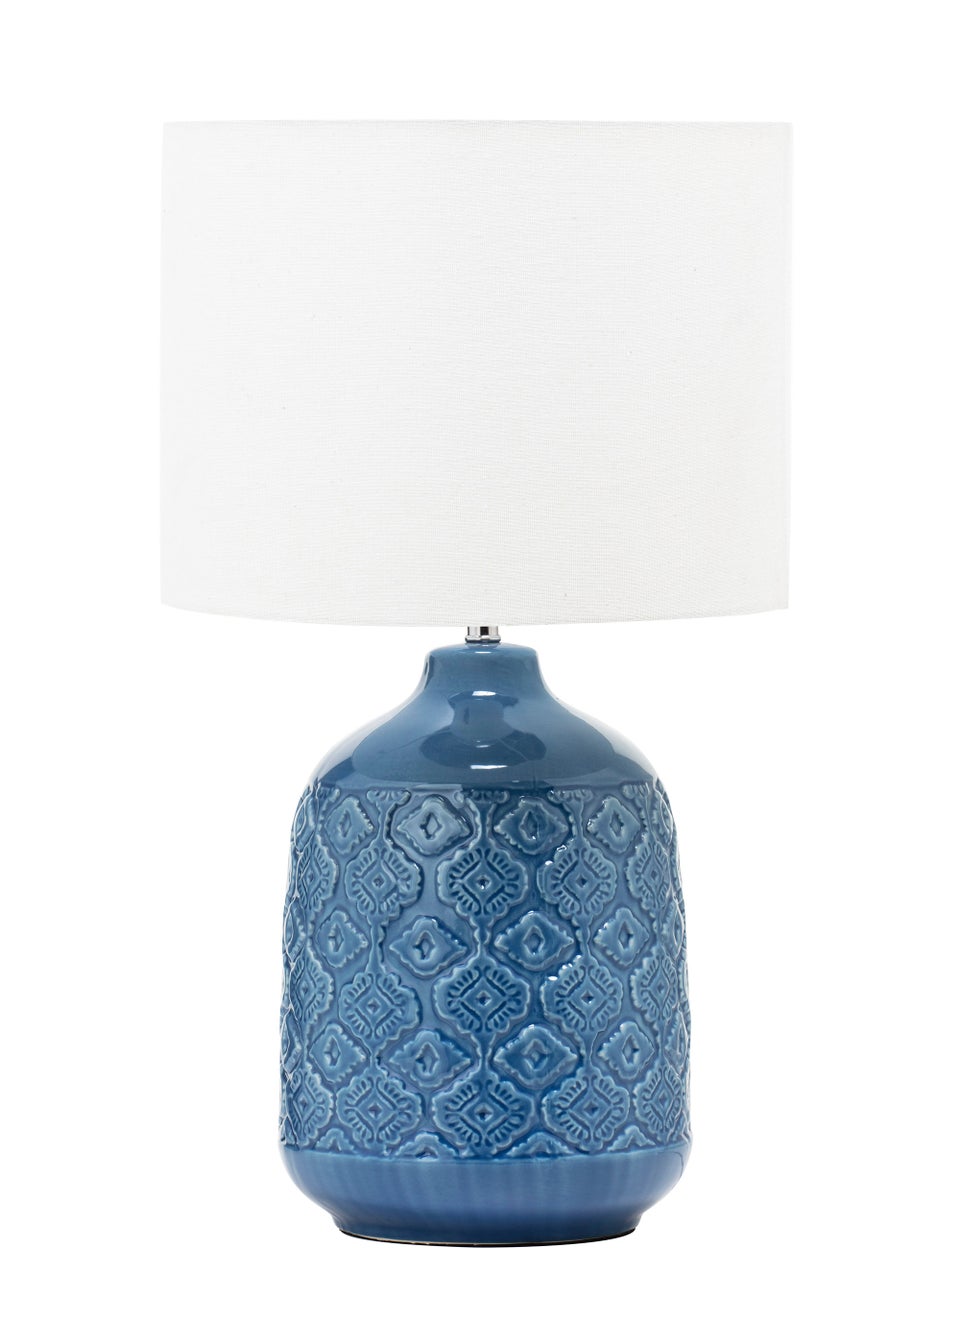 BHS Cosgrove Patterned Ceramic Table Lamp